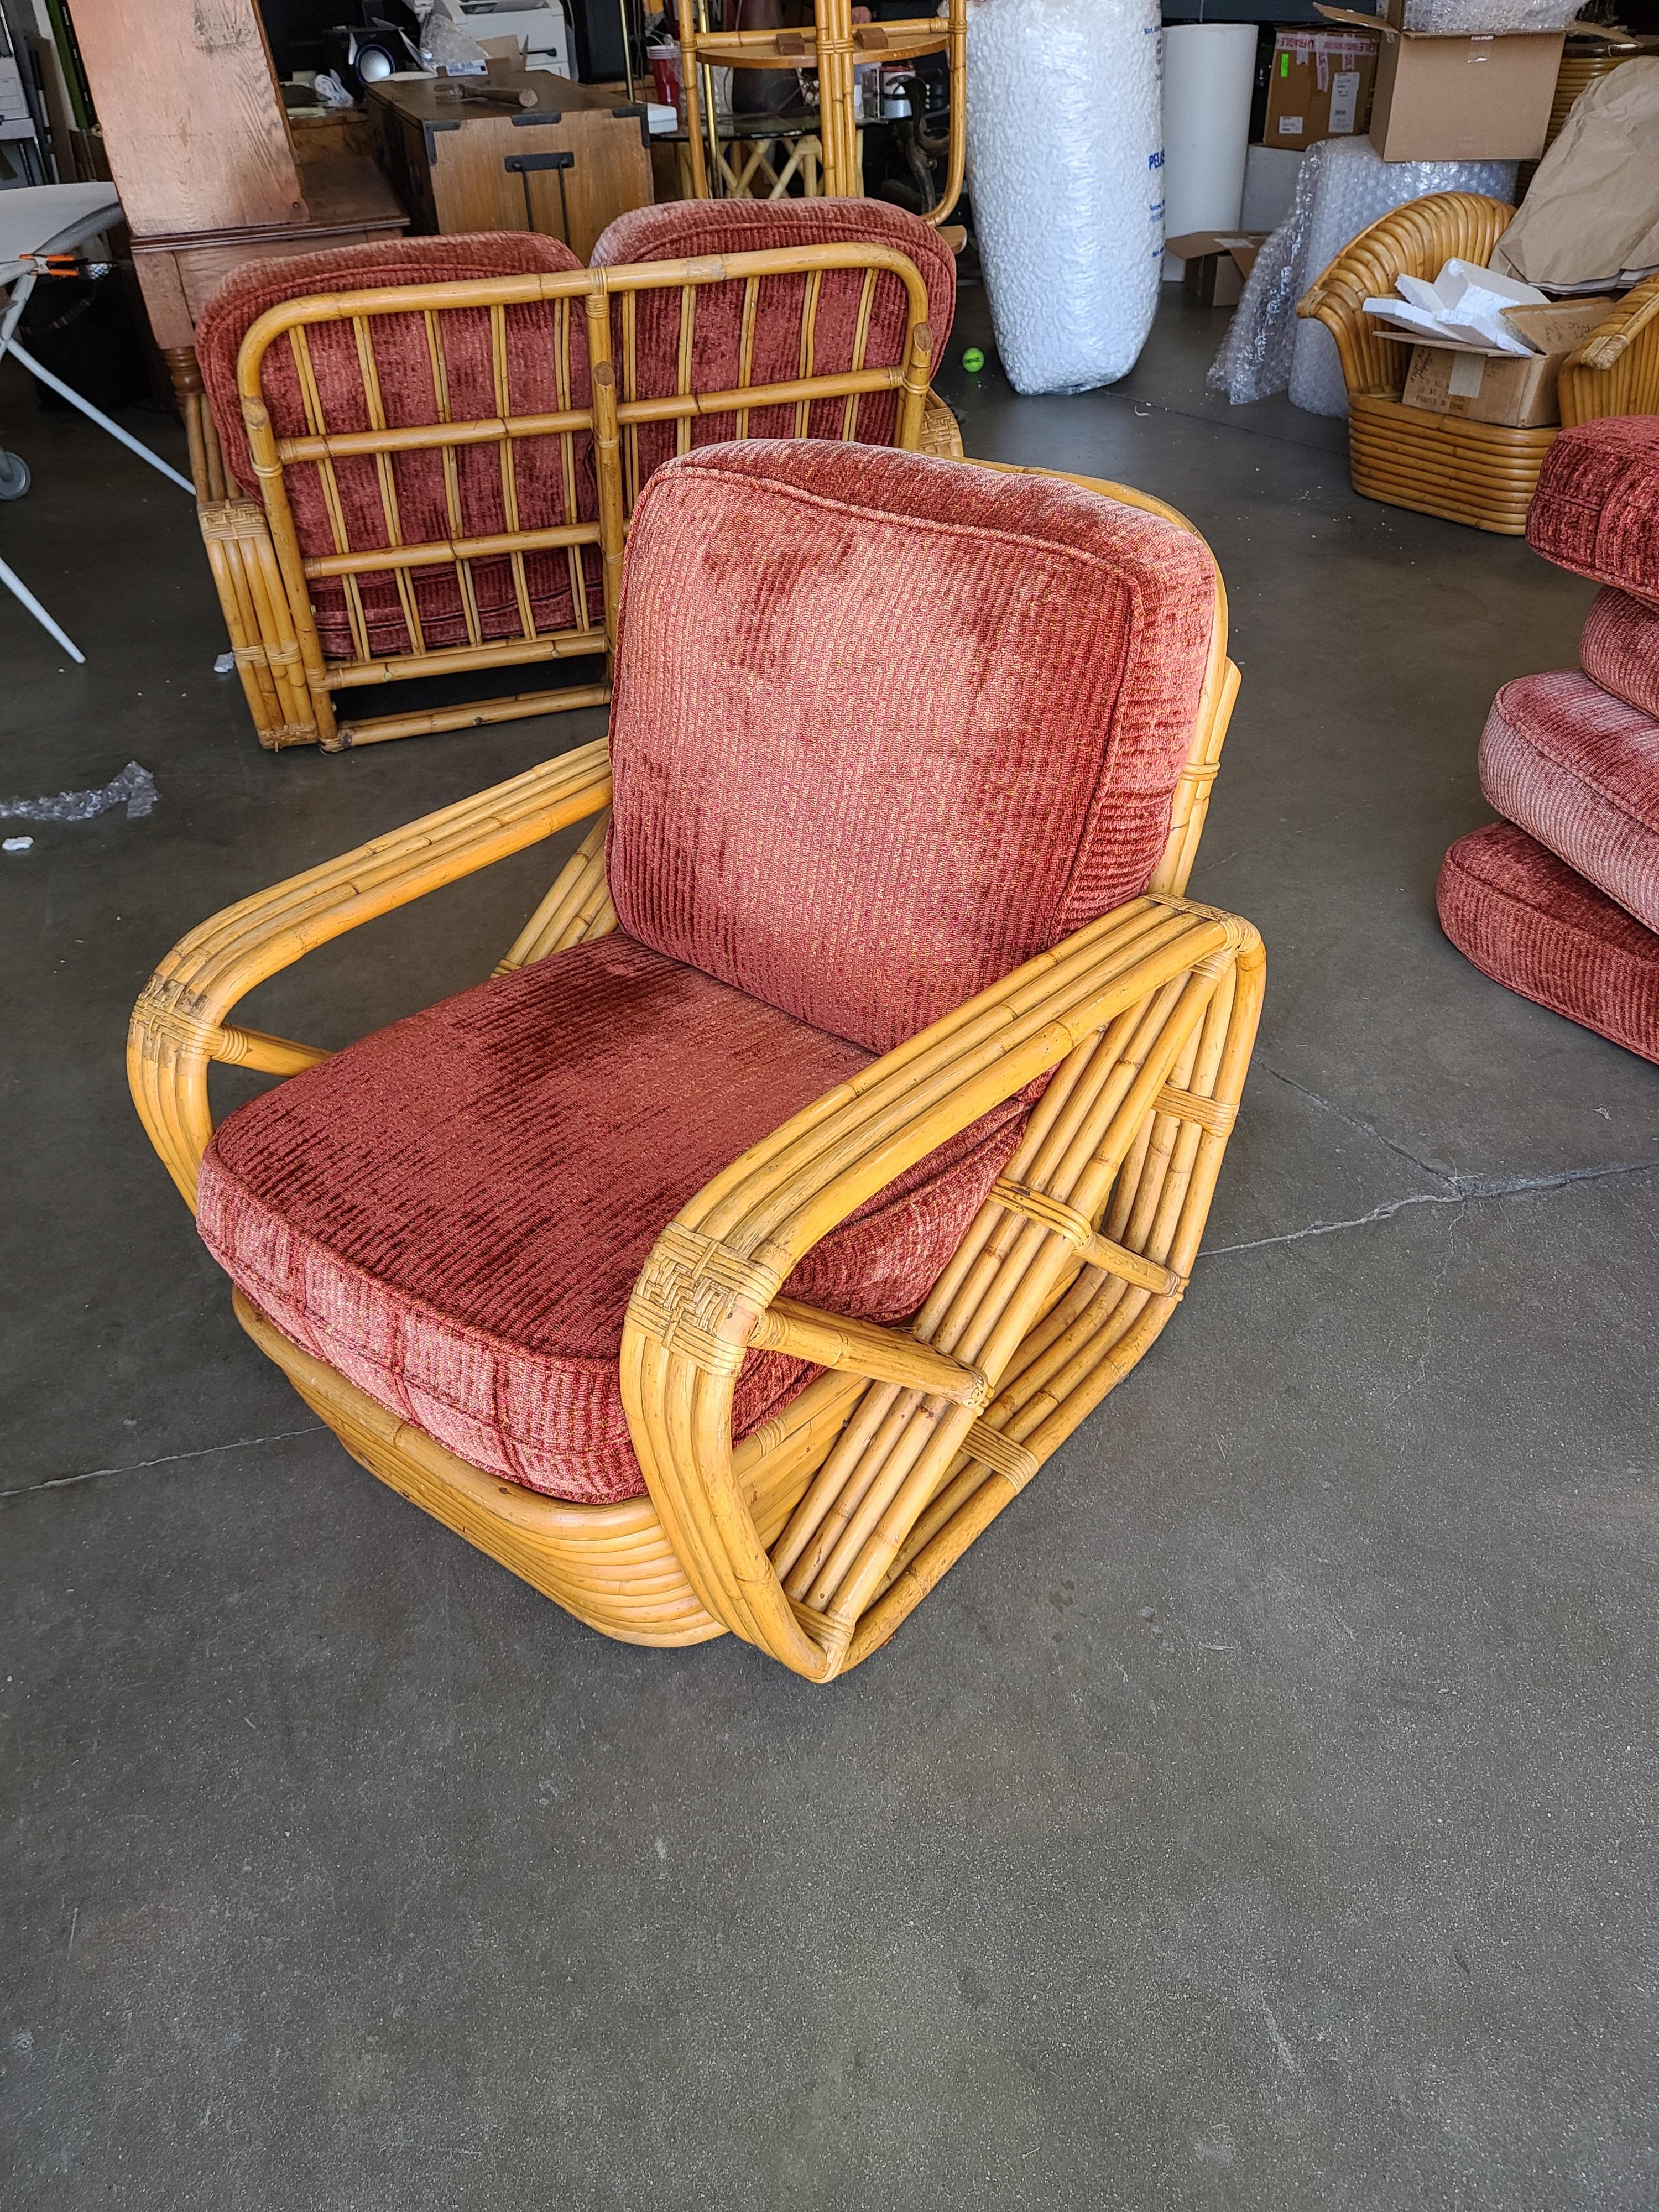 Paul Frankl six Strand Square Pretzel rattan arm lounge chair. This chair dates from 1934. This chair is a Paul Frankl original. This comes directly for a Paul Frankl decorated house located in Los Angeles and is documented, please contact us for